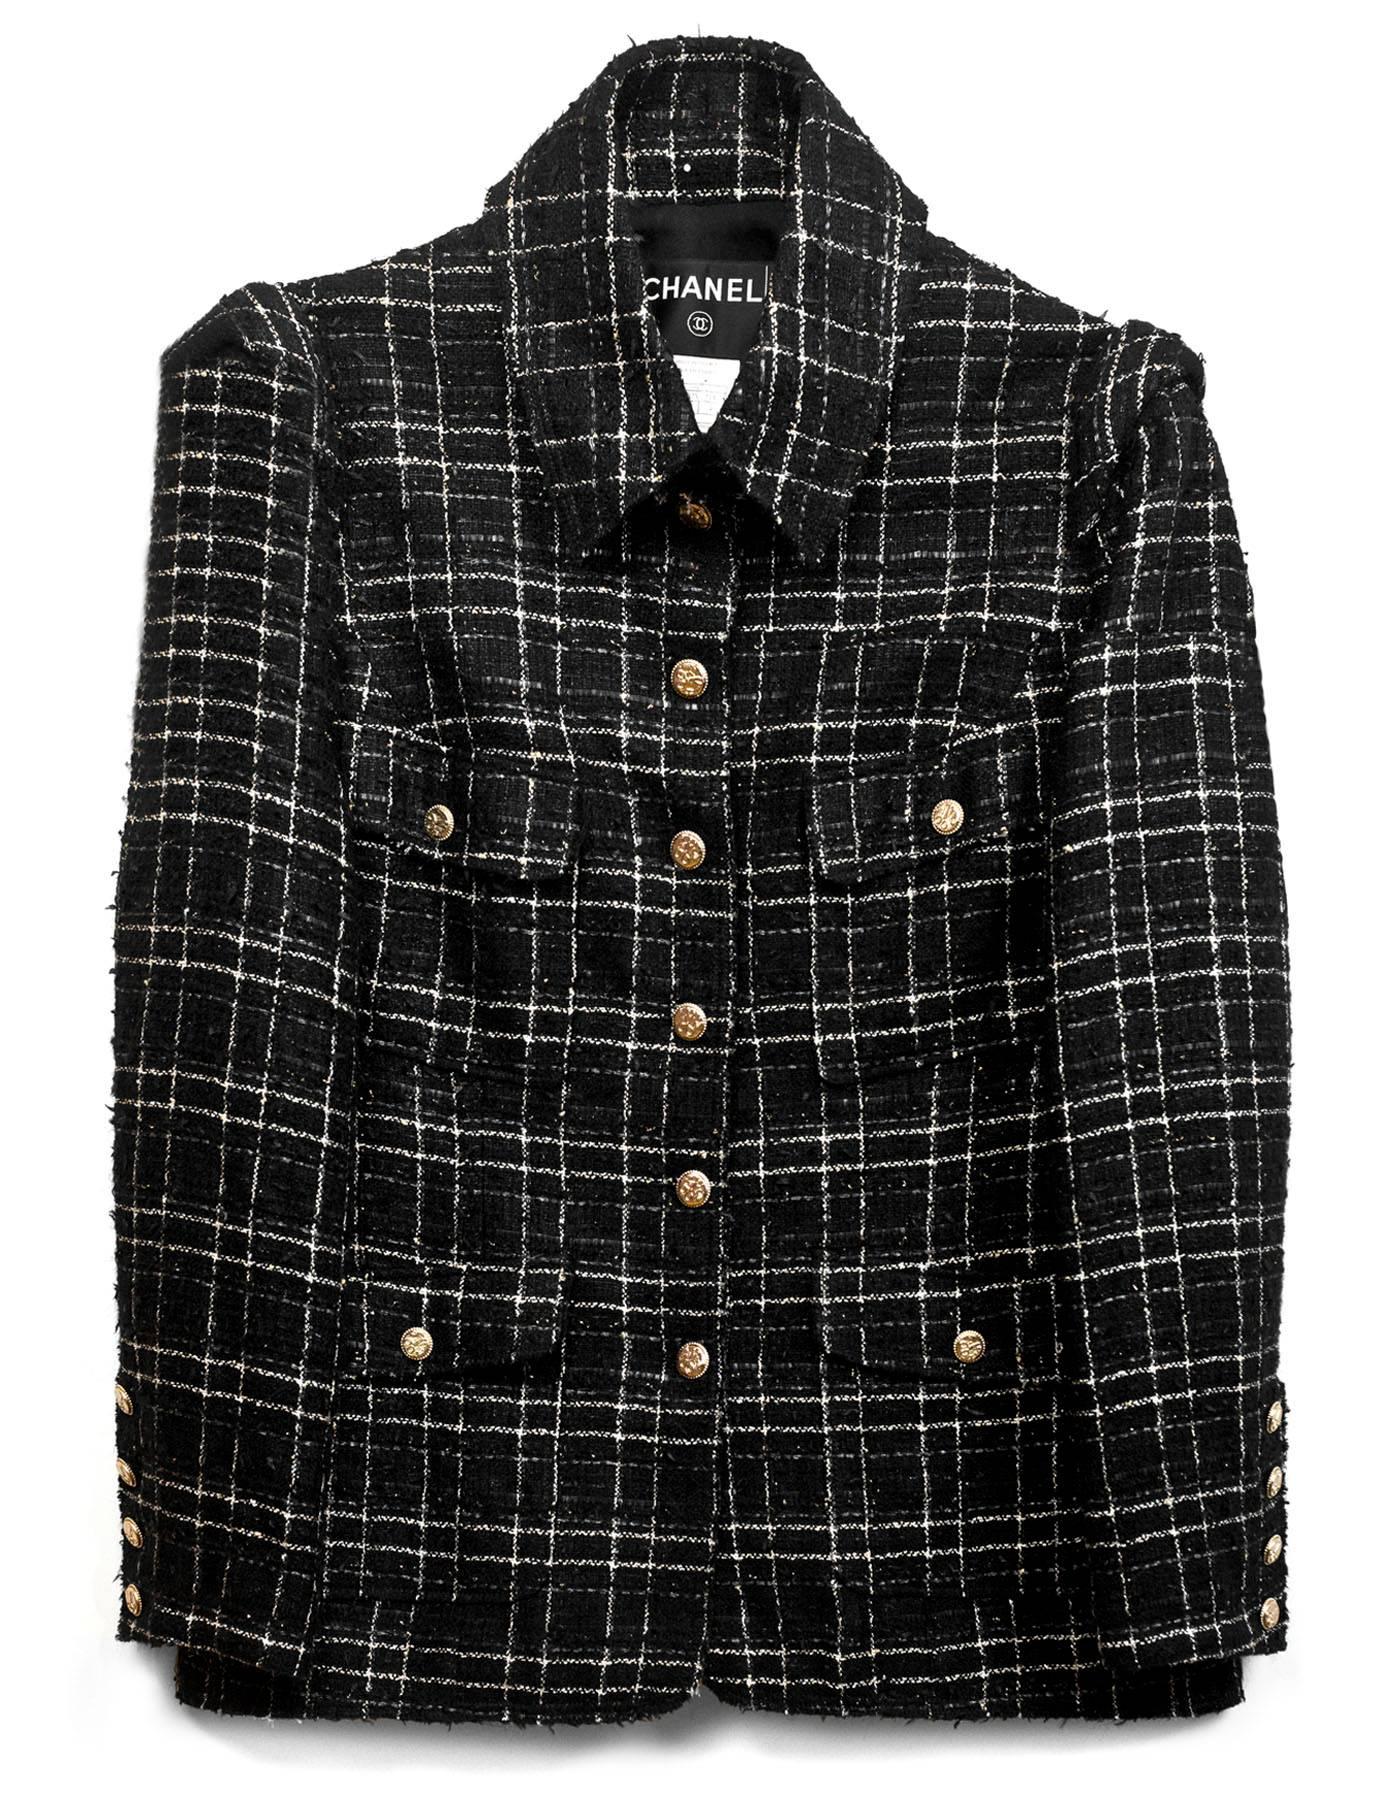 Chanel Black & White Tweed Jacket 
Features metallic stitching throughout

Made In: France
Year of Production: 2008
Color: Black and white
Composition: 35% wool, 20% acrylic, 20% rayon, 10% nylon, 5% vinyon, 5% mohair, 3% metal, 2%